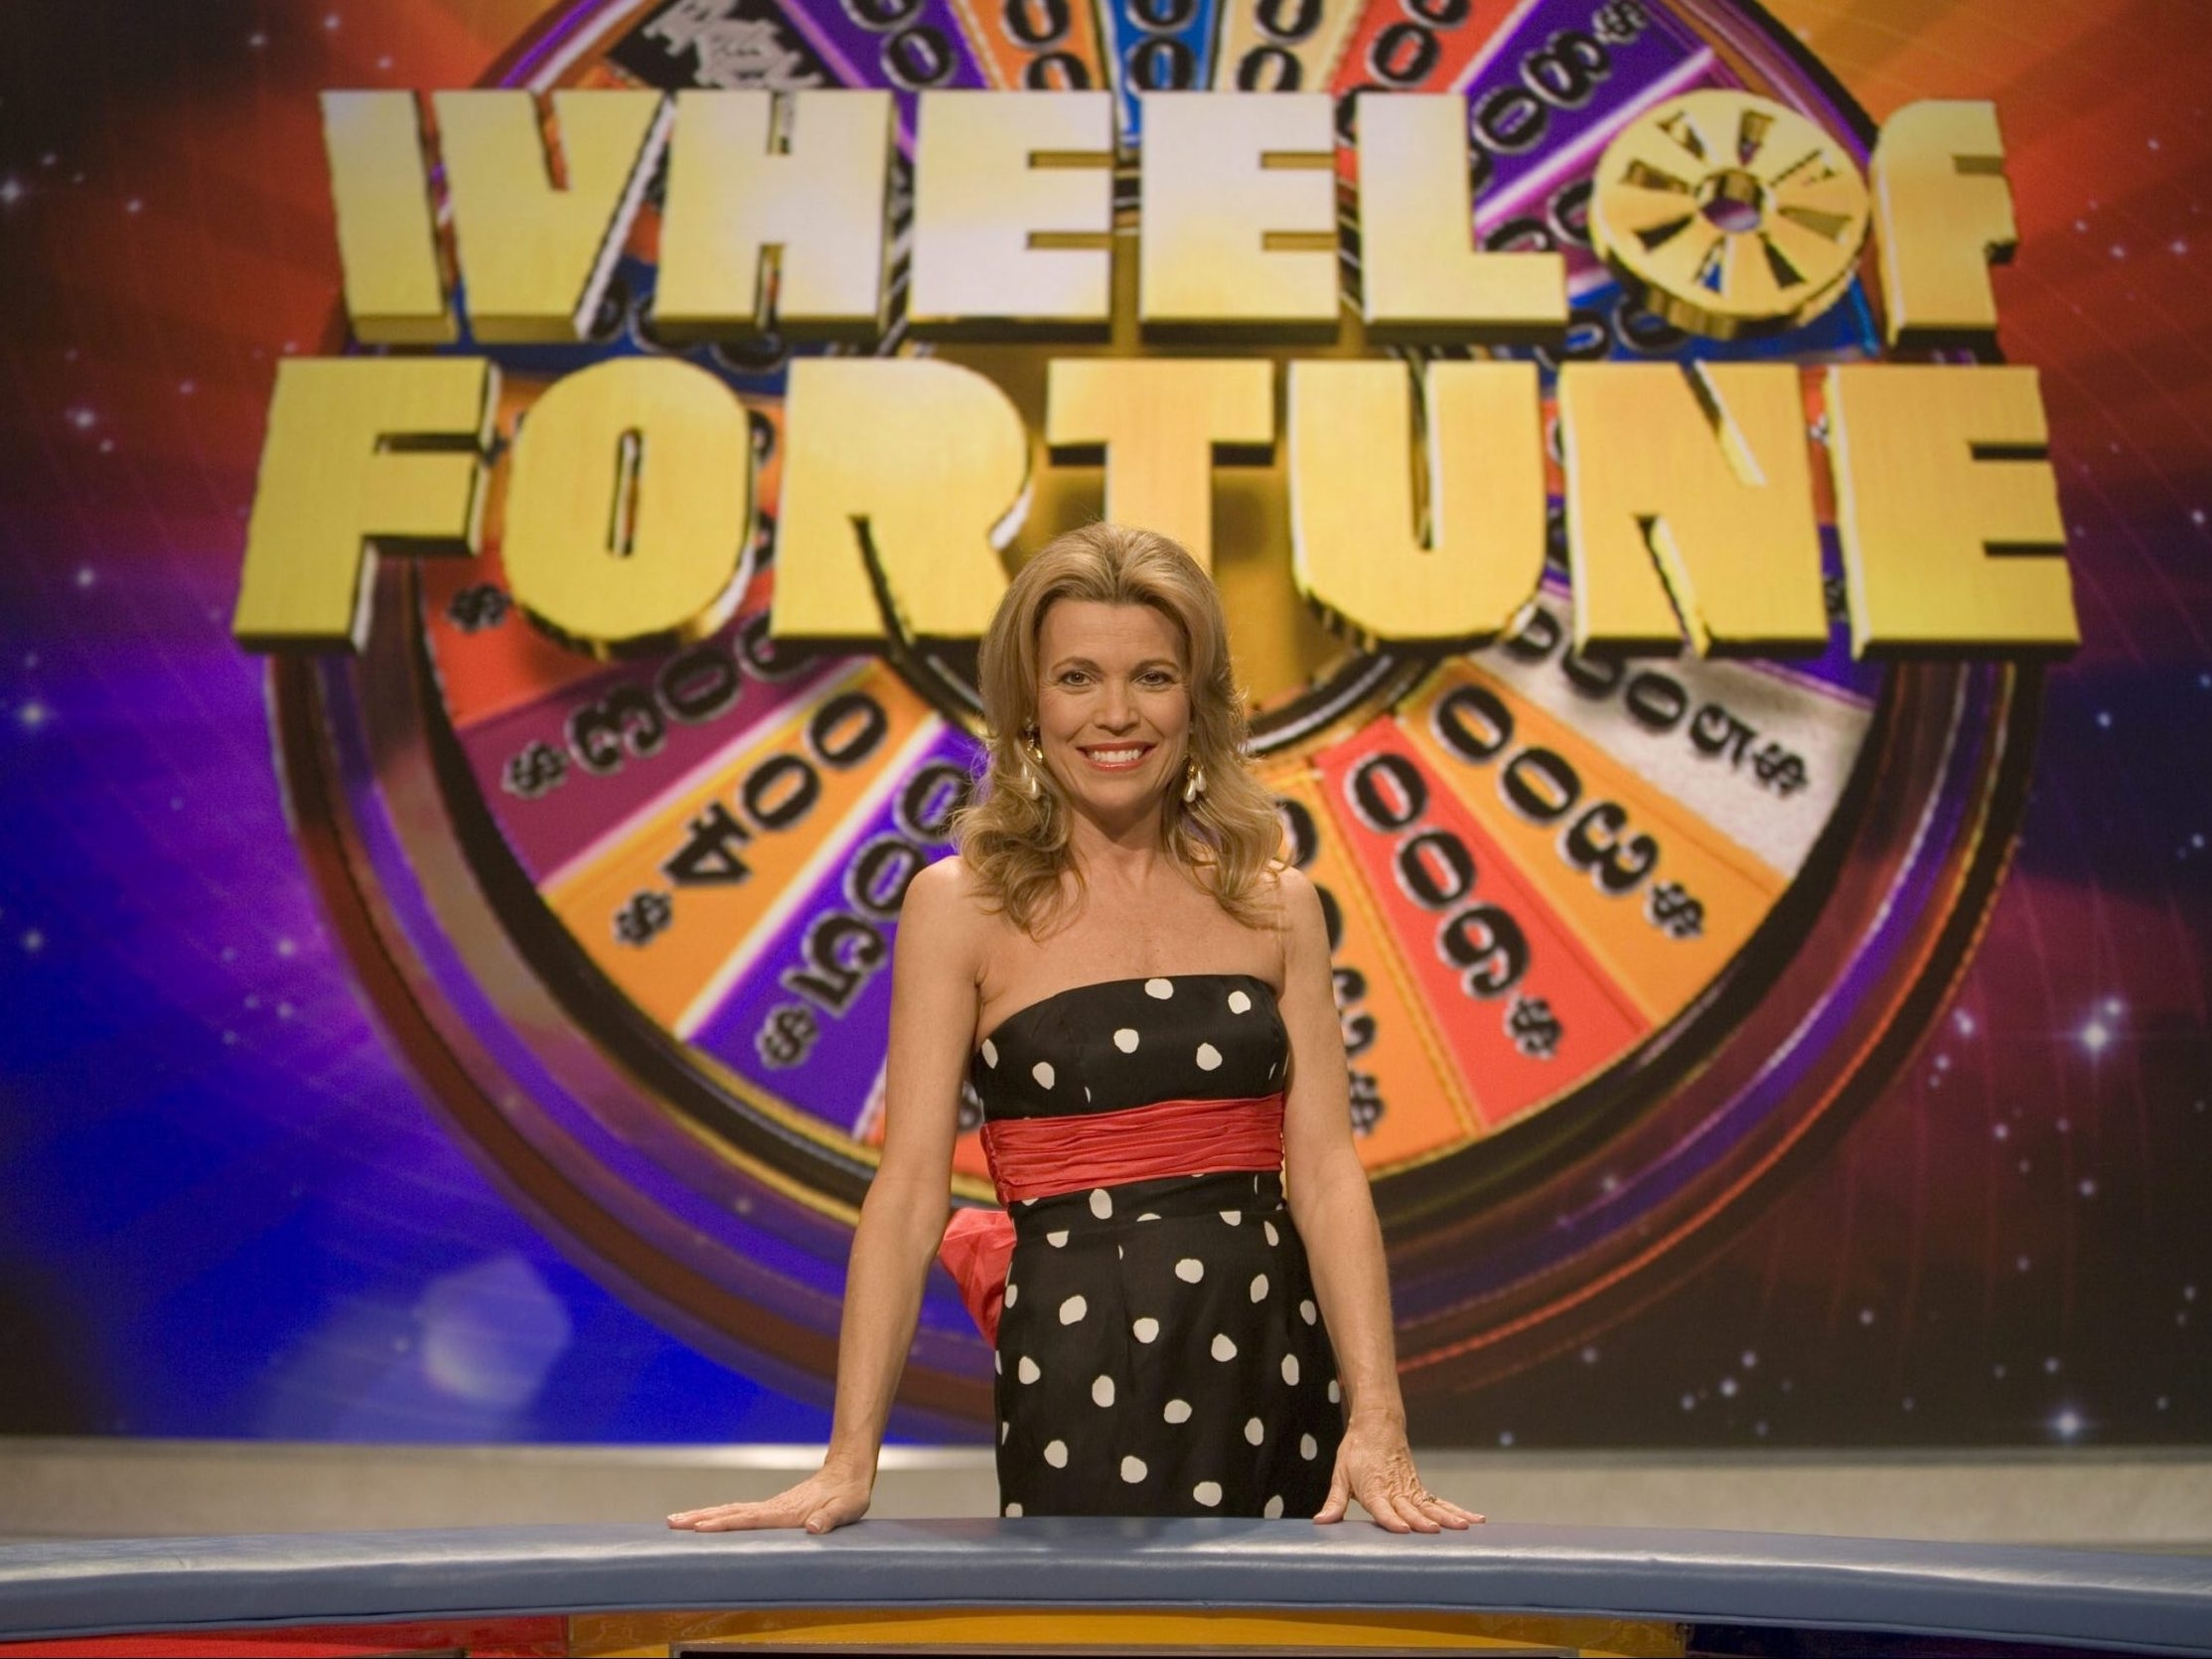 Wheel of Fortune fans shocked after they notice major 'ERROR' as